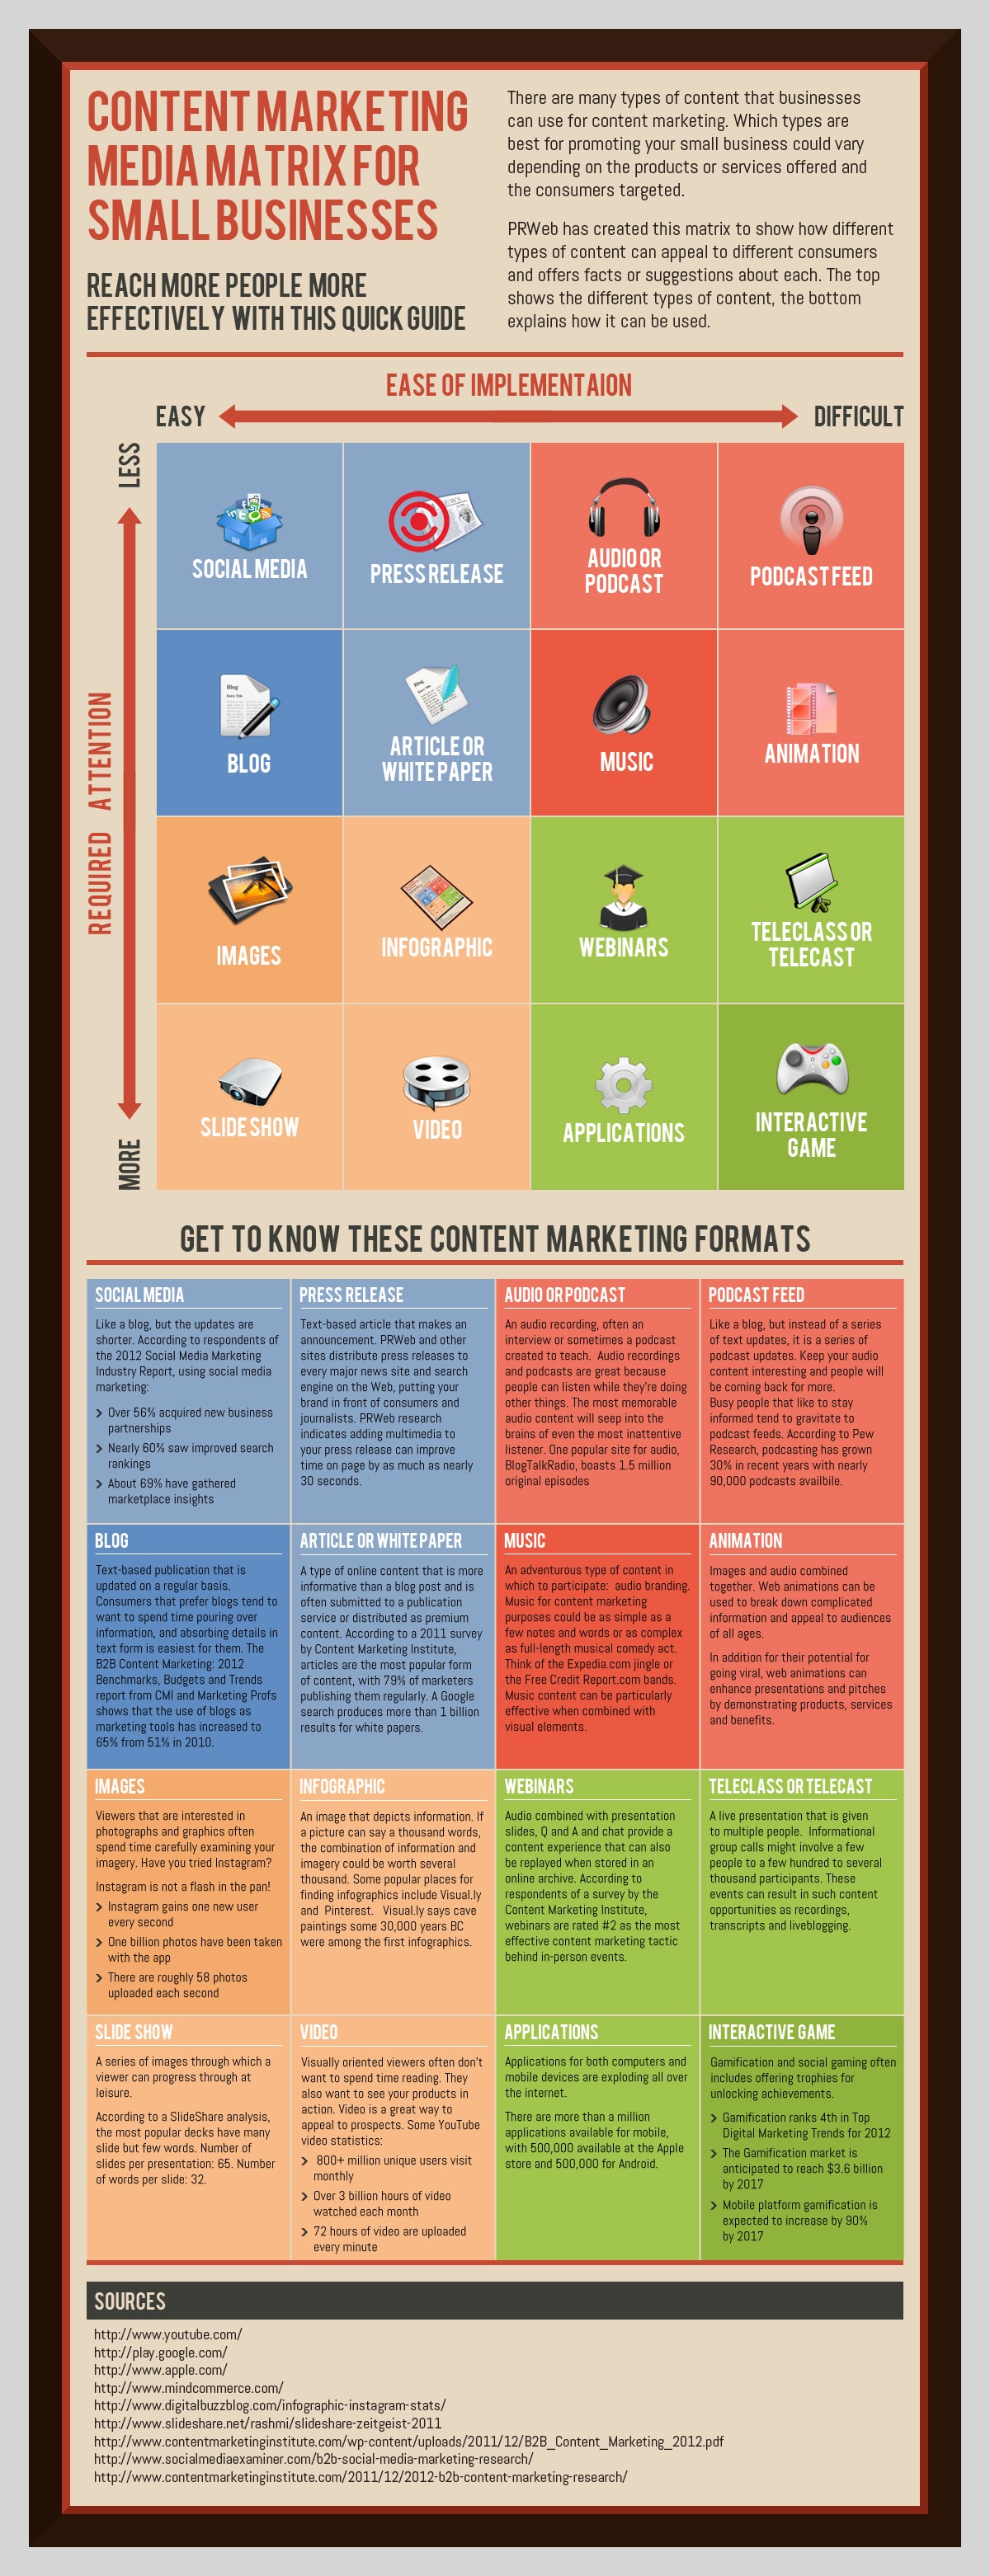 marketing-content-impact-guide-infographic